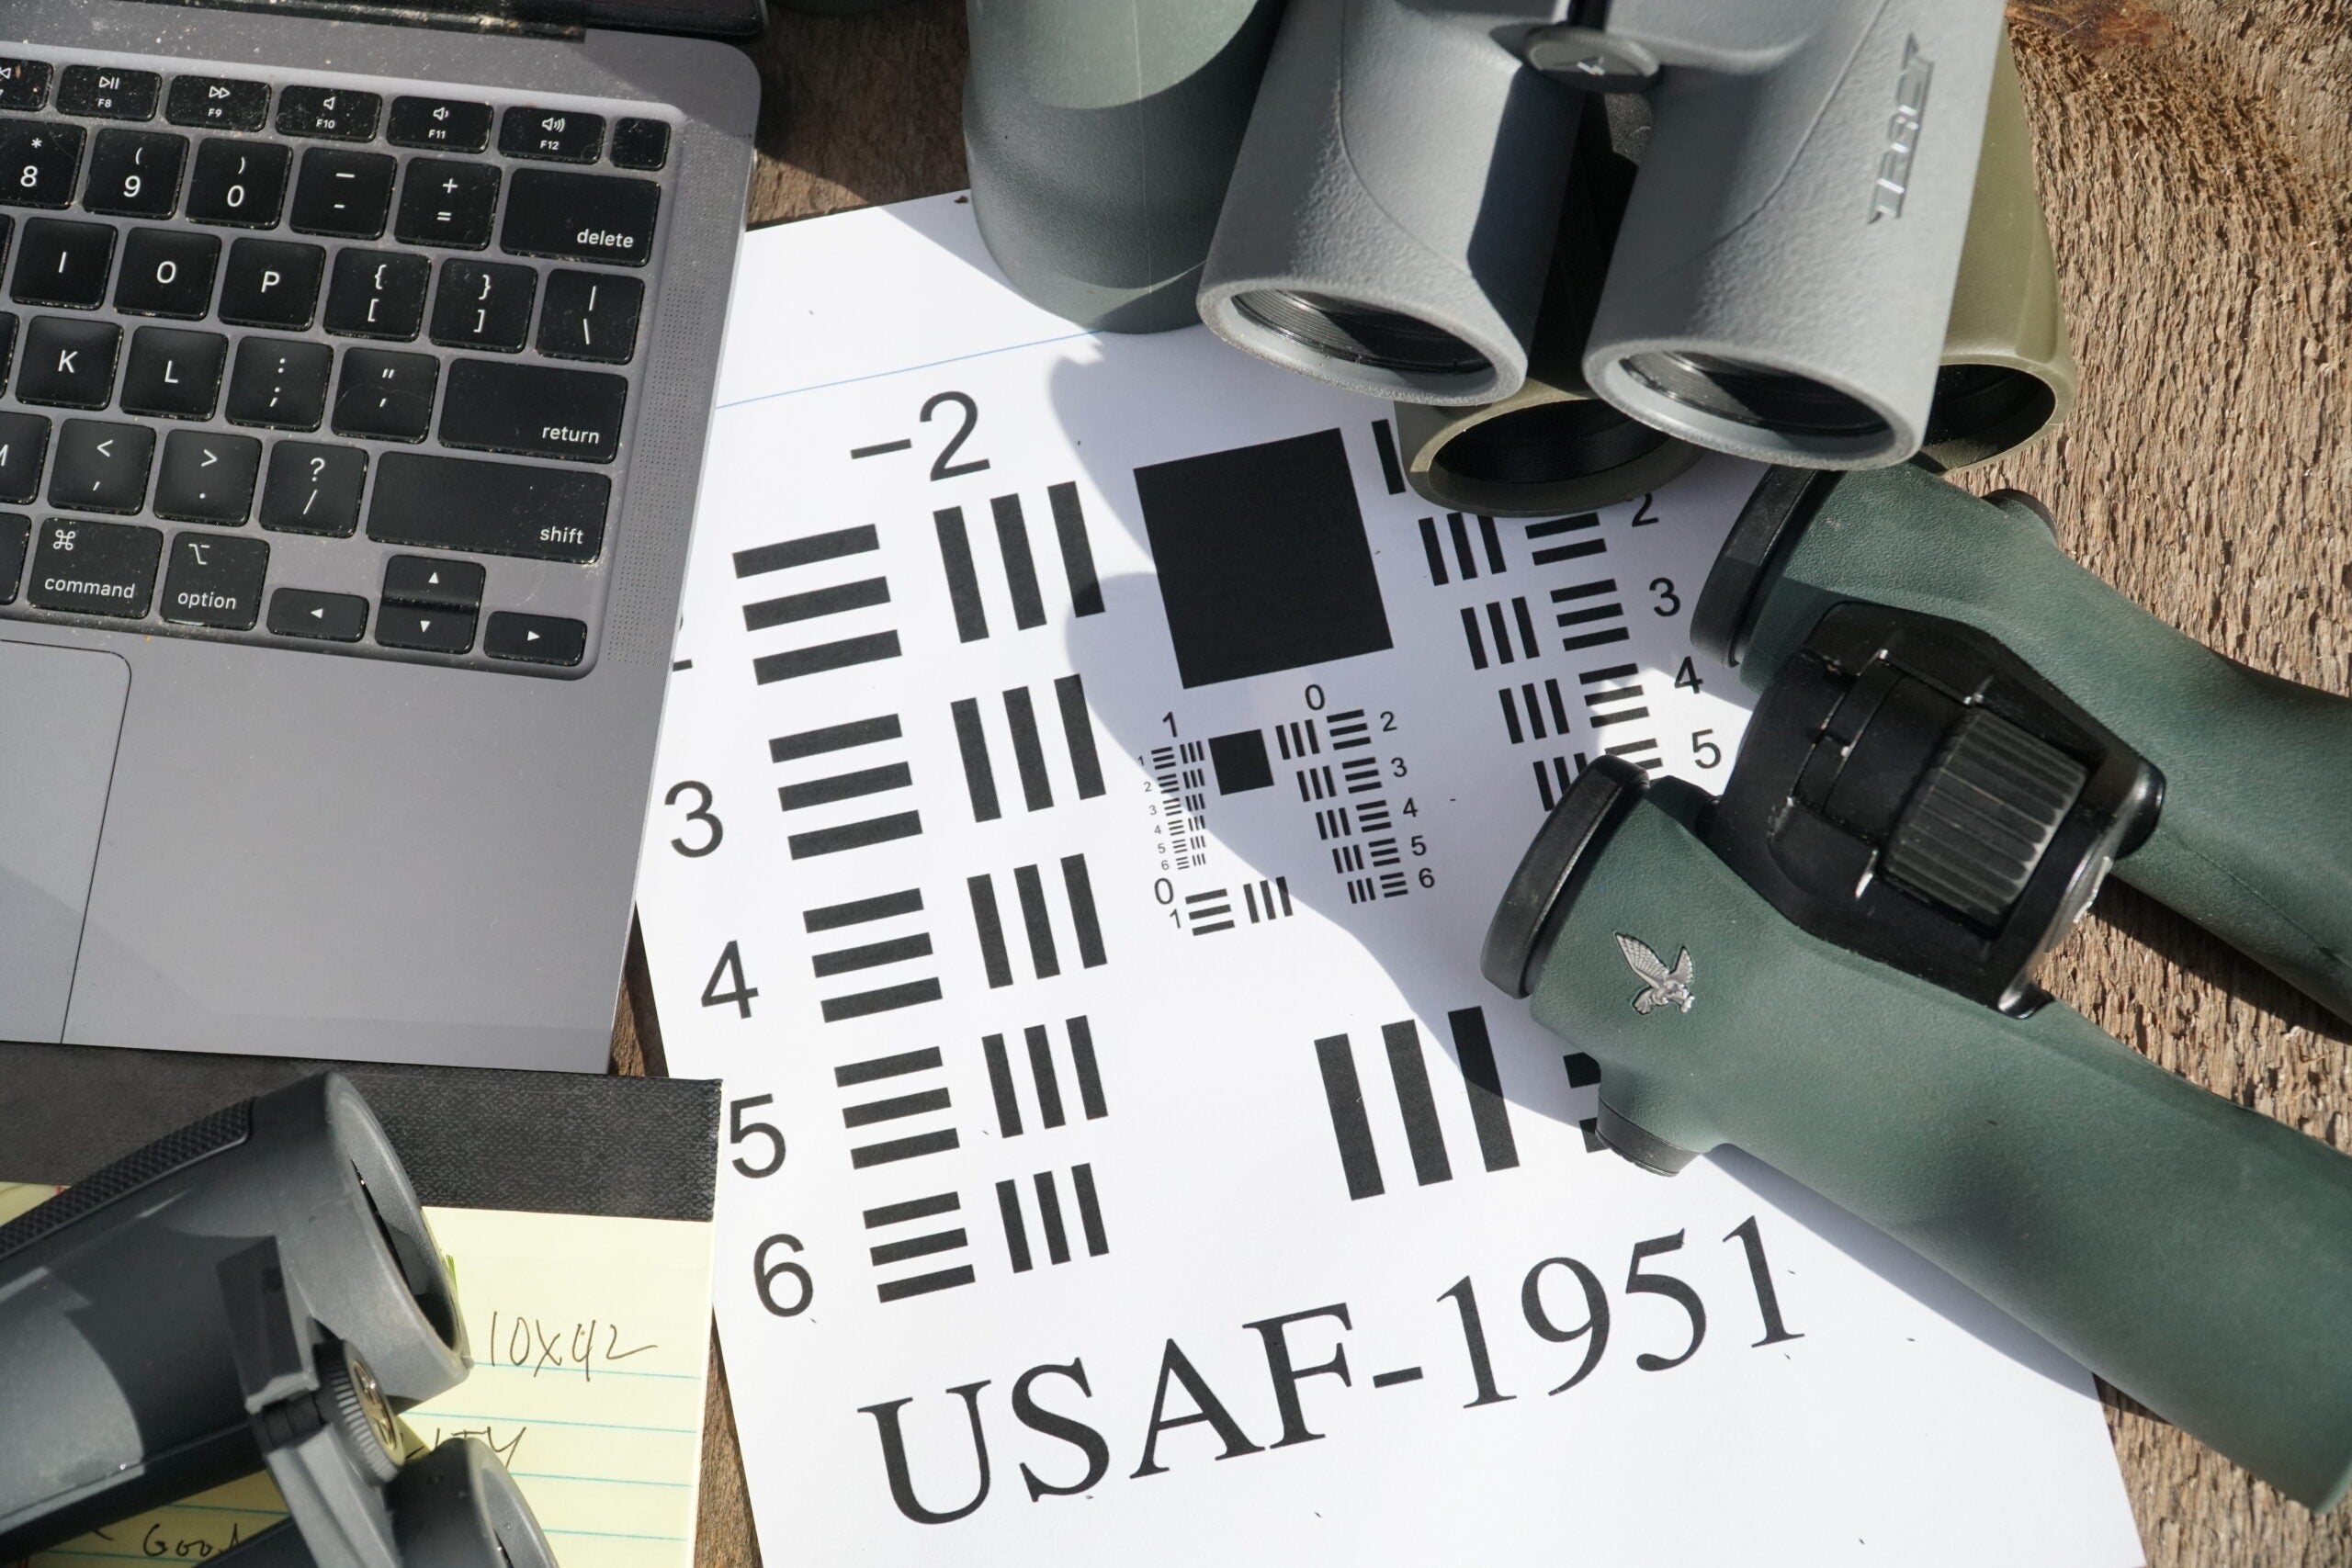 A SSAF-1951 resolution chart on a table with computer and binoculars.